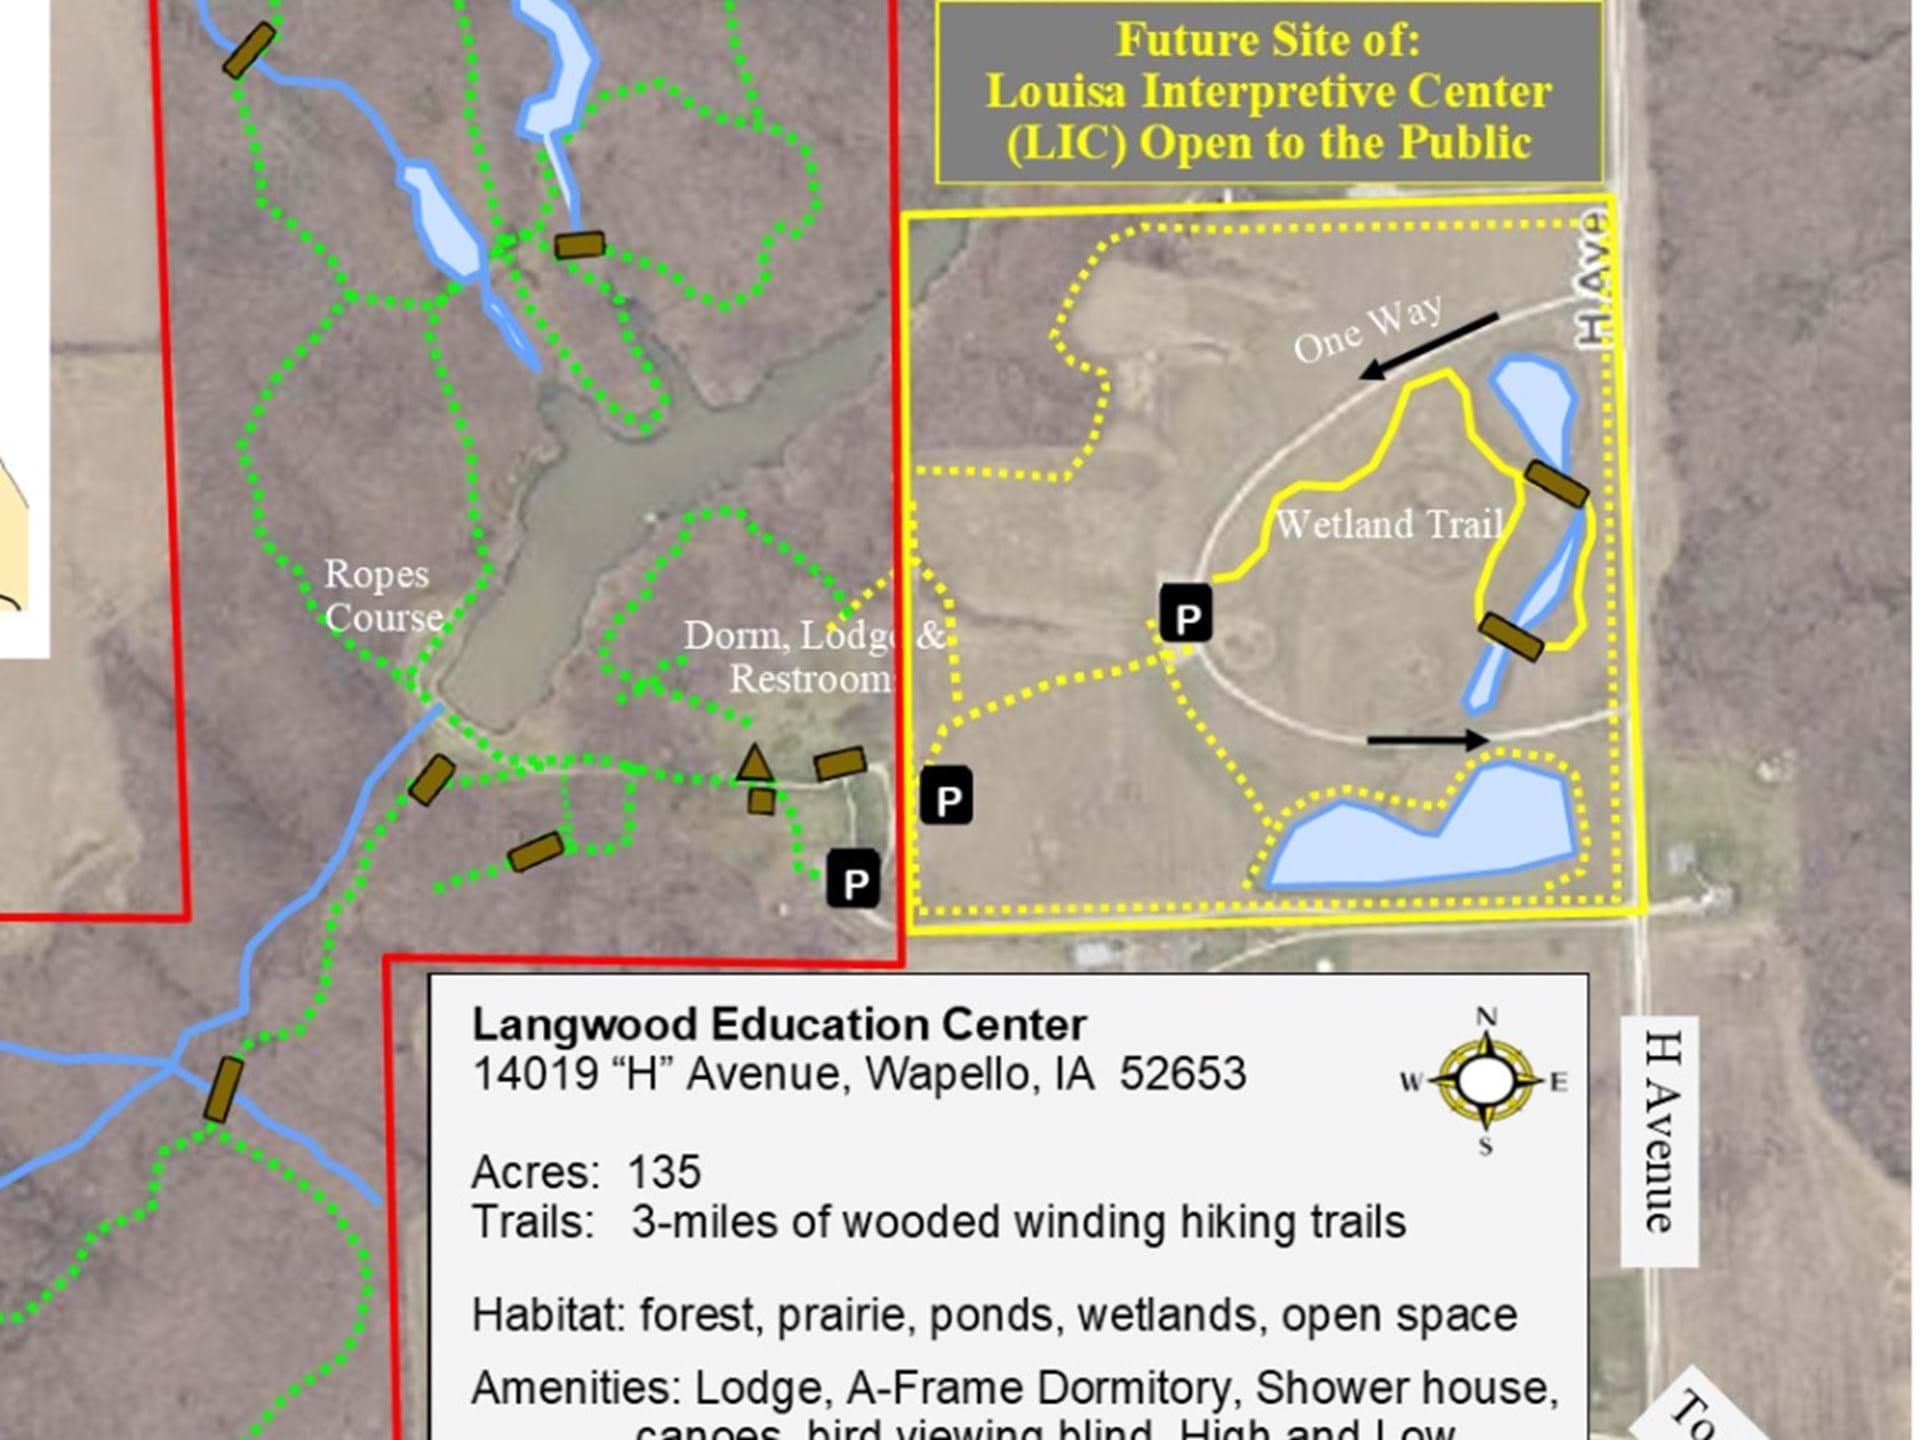 Map showing the Wetland Trail and Langwood